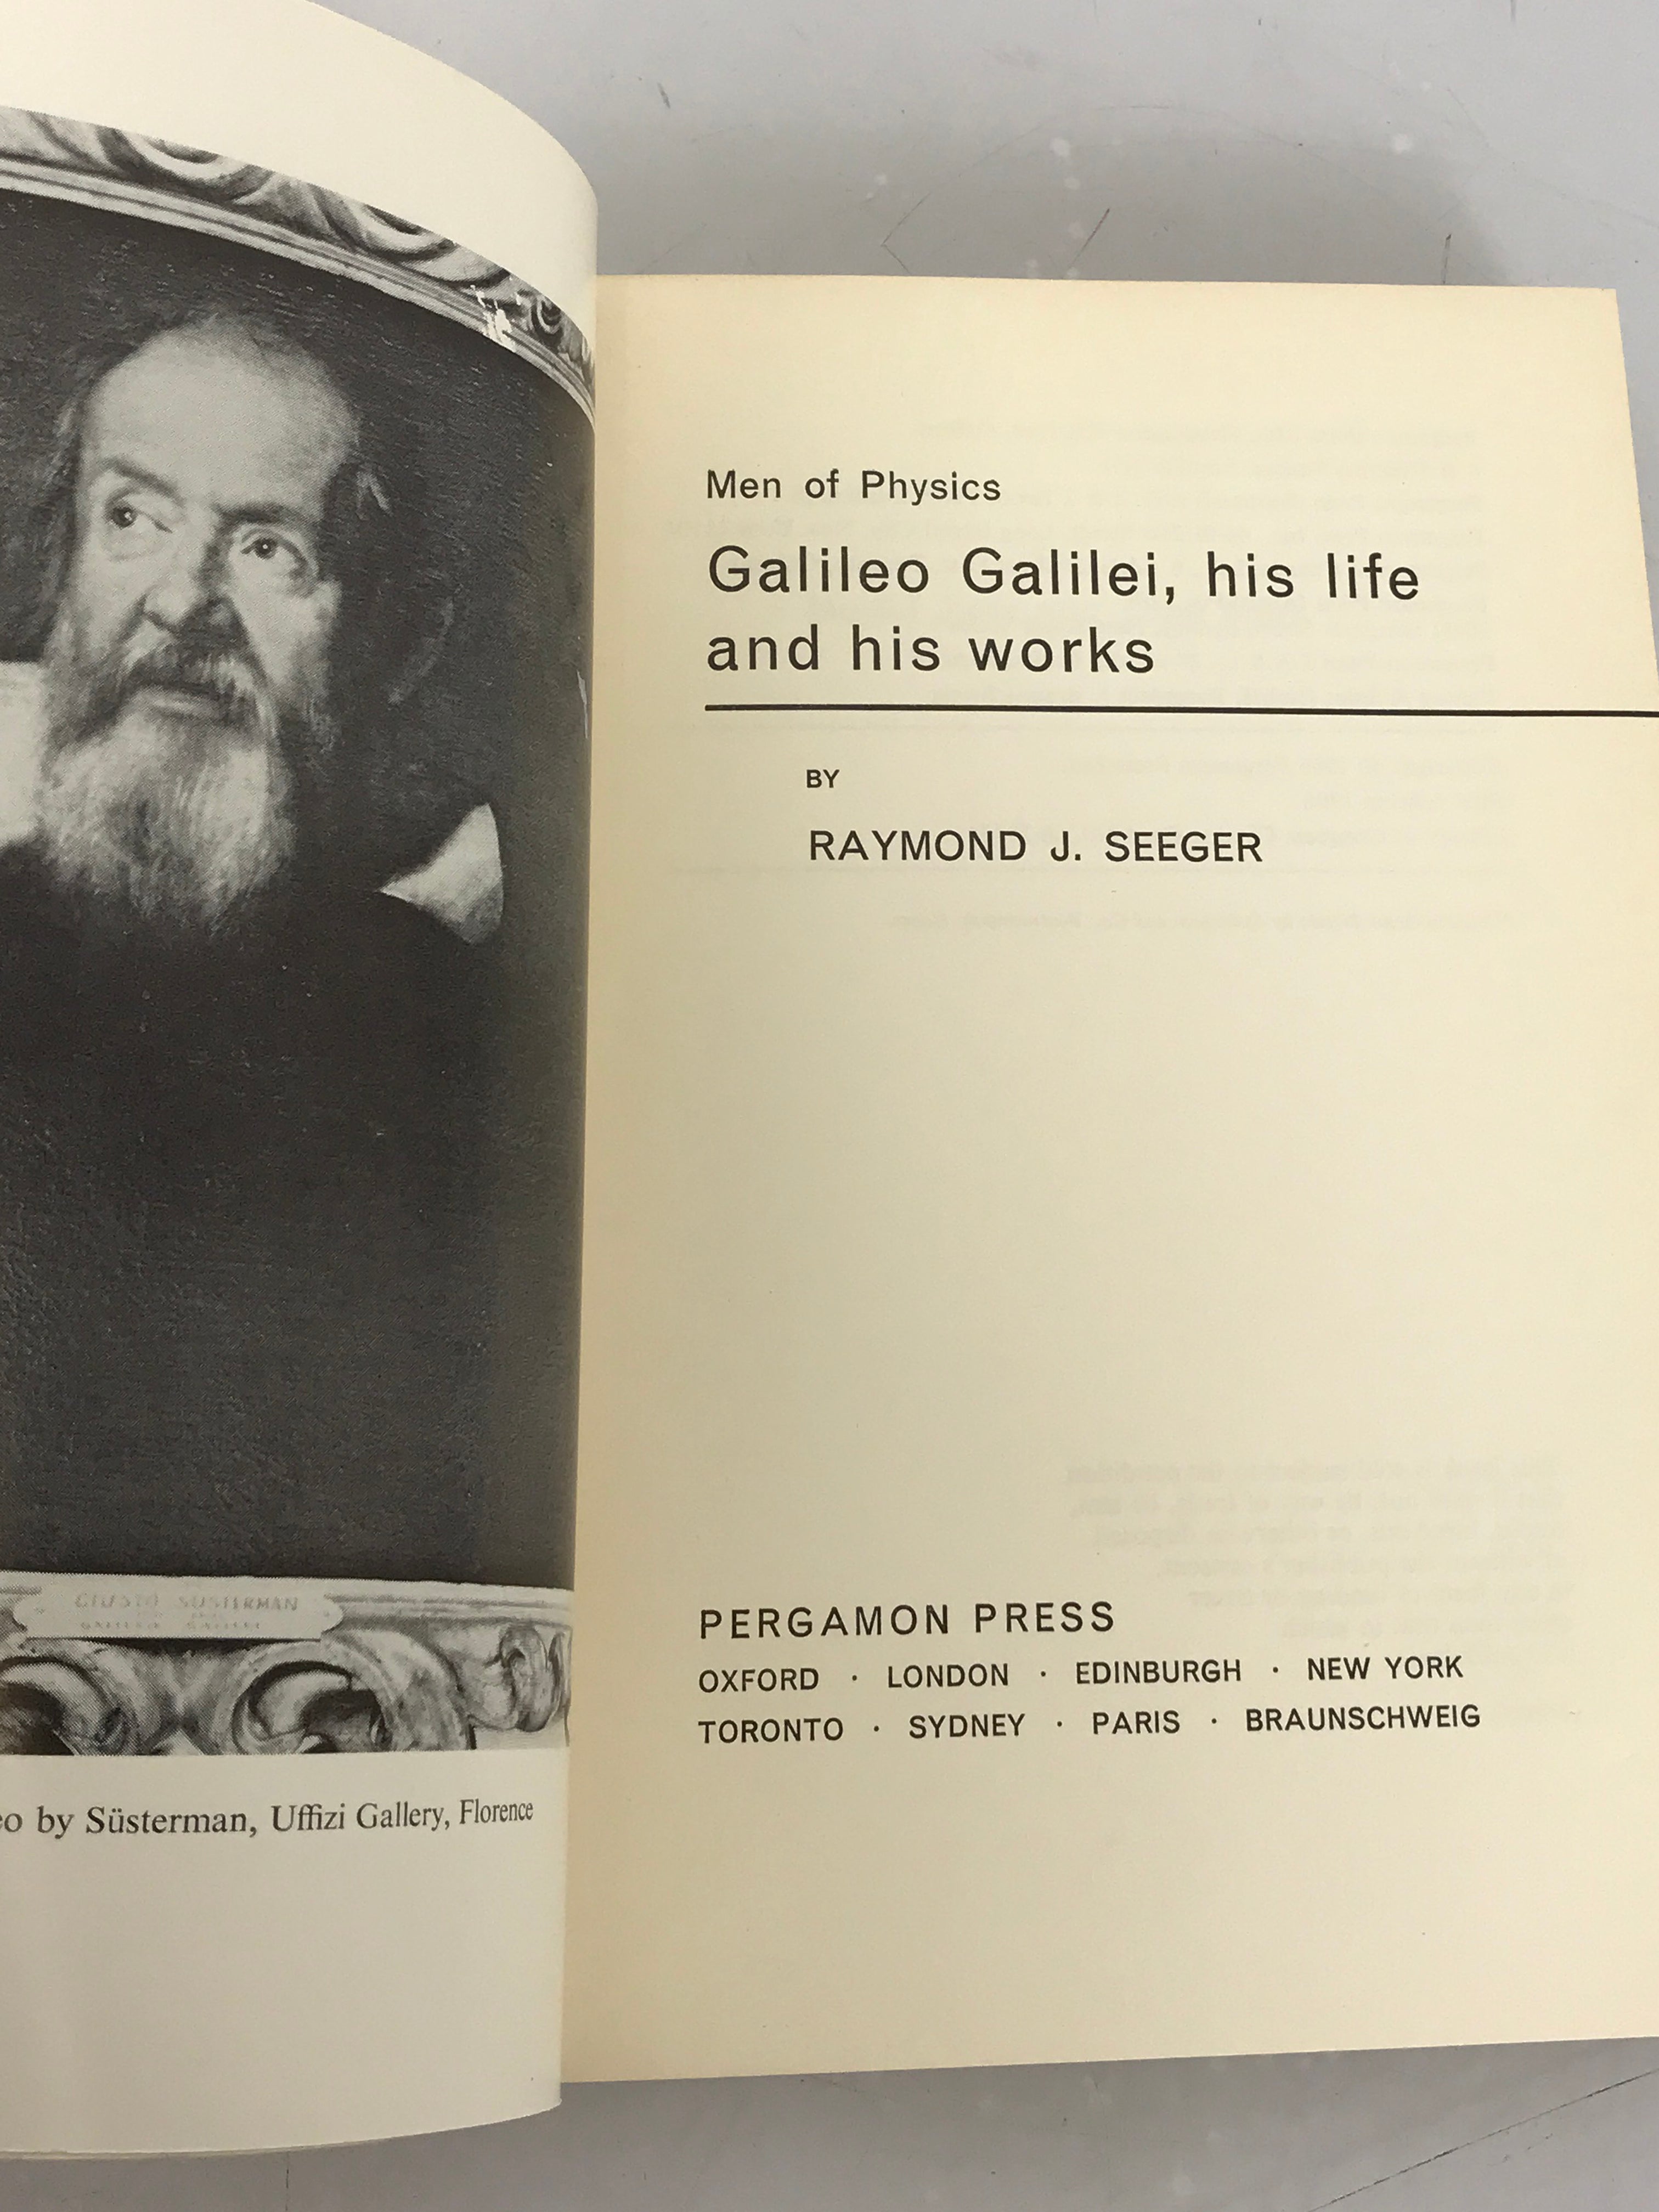 Lot of 2 Galileo Books: Discoveries and Opinions of Galileo (1957) and Galileo Galilei, His Life and His Works (1966) SC